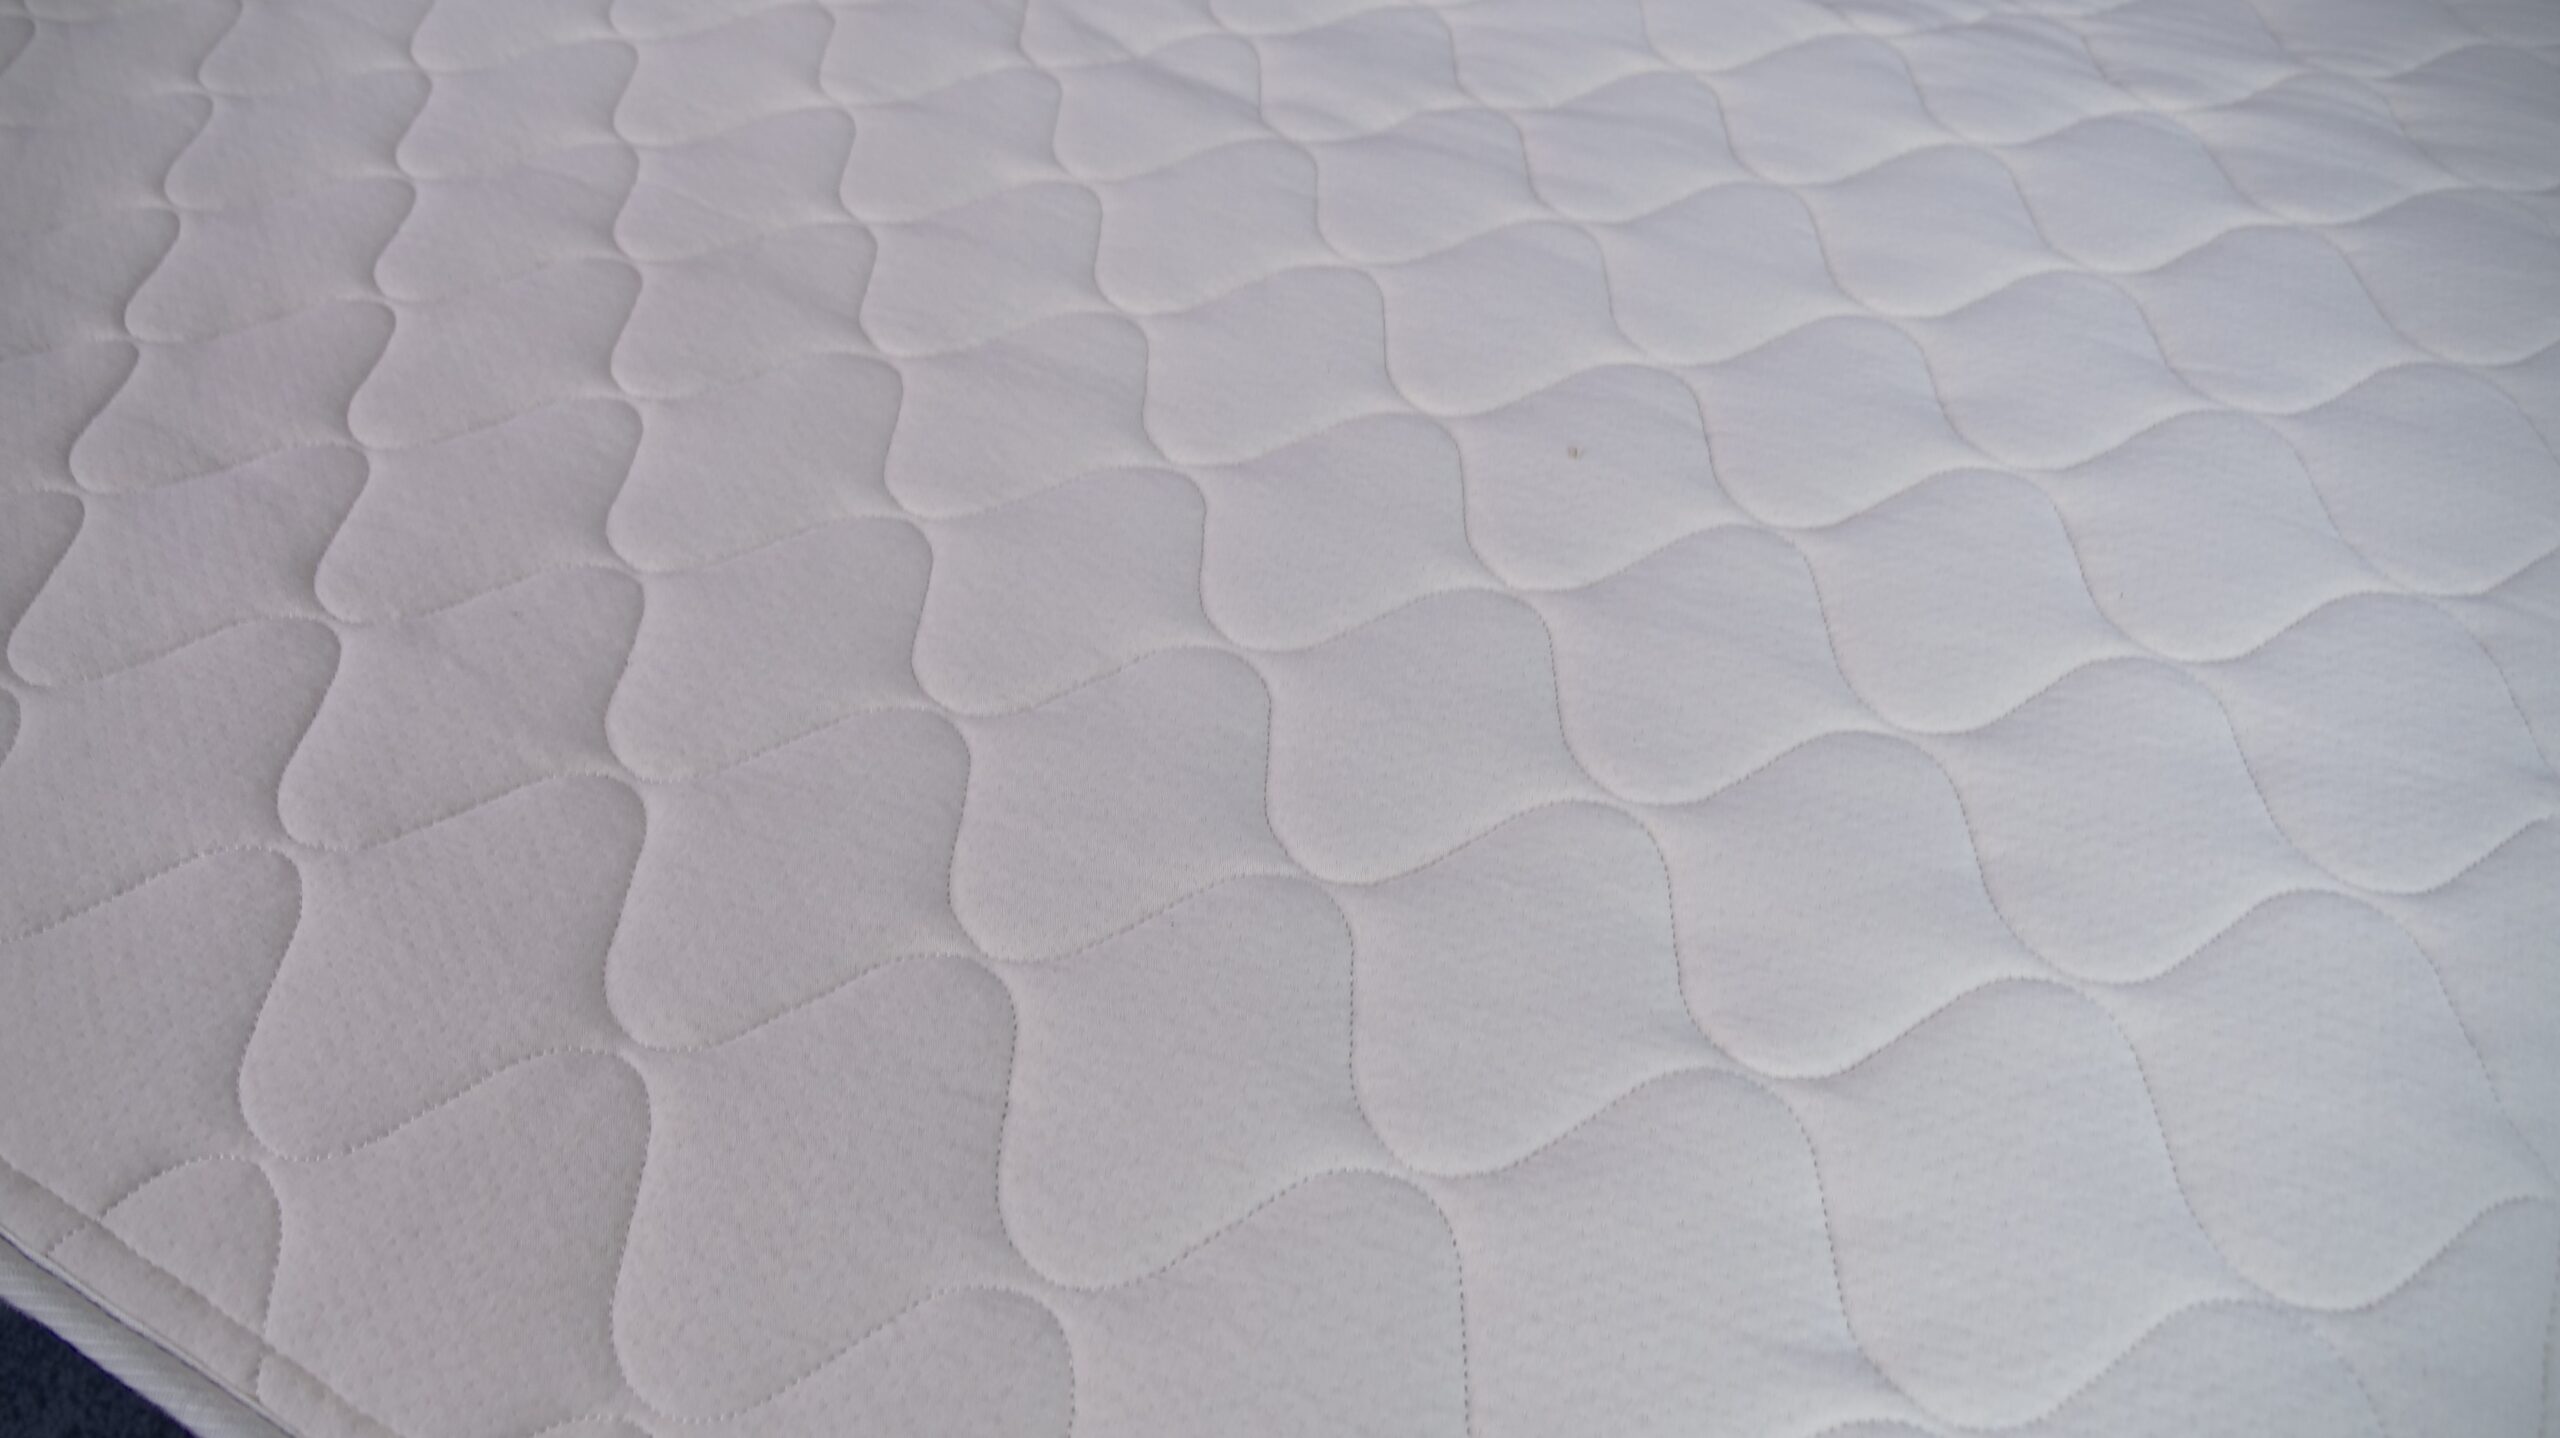 The cover on the WinkBeds EcoCloud Hybrid Mattress